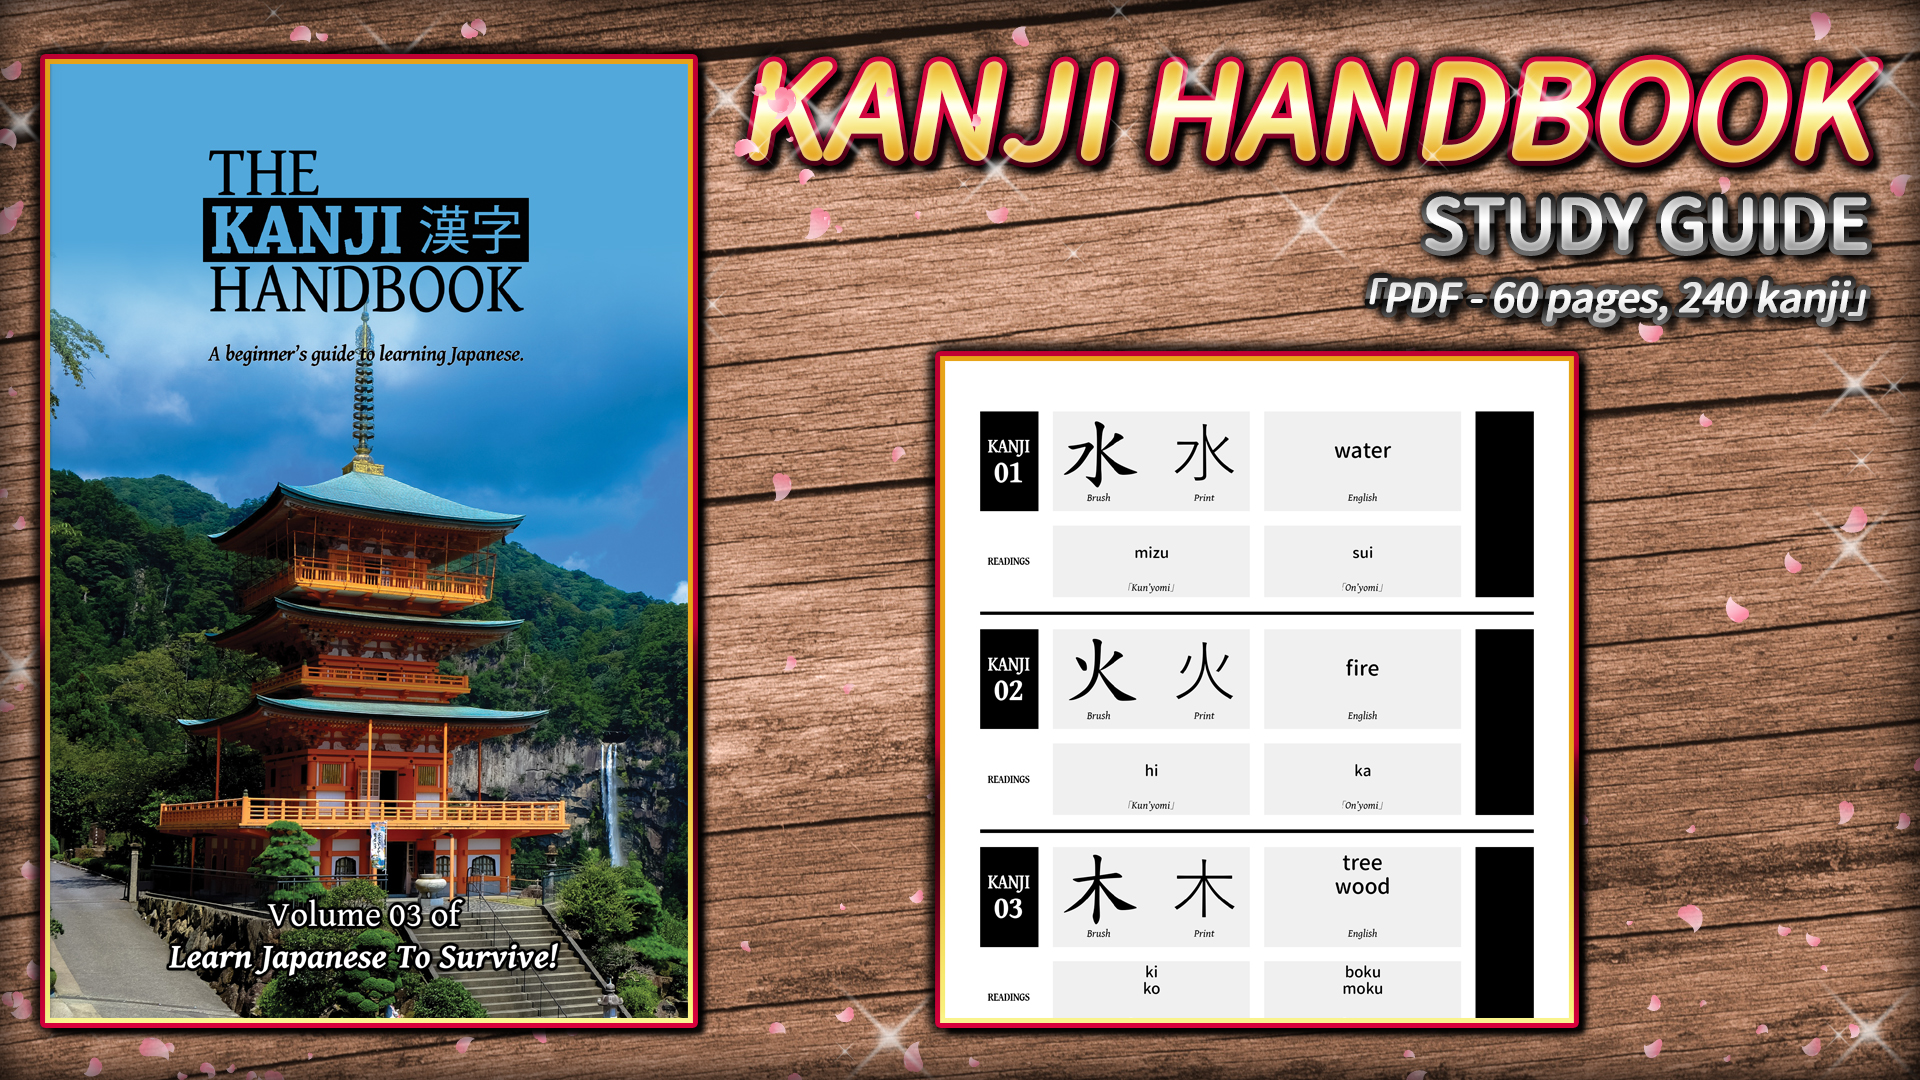 The Learn Japanese To Survive! Kanji Combat Study Pack Steam CD Key